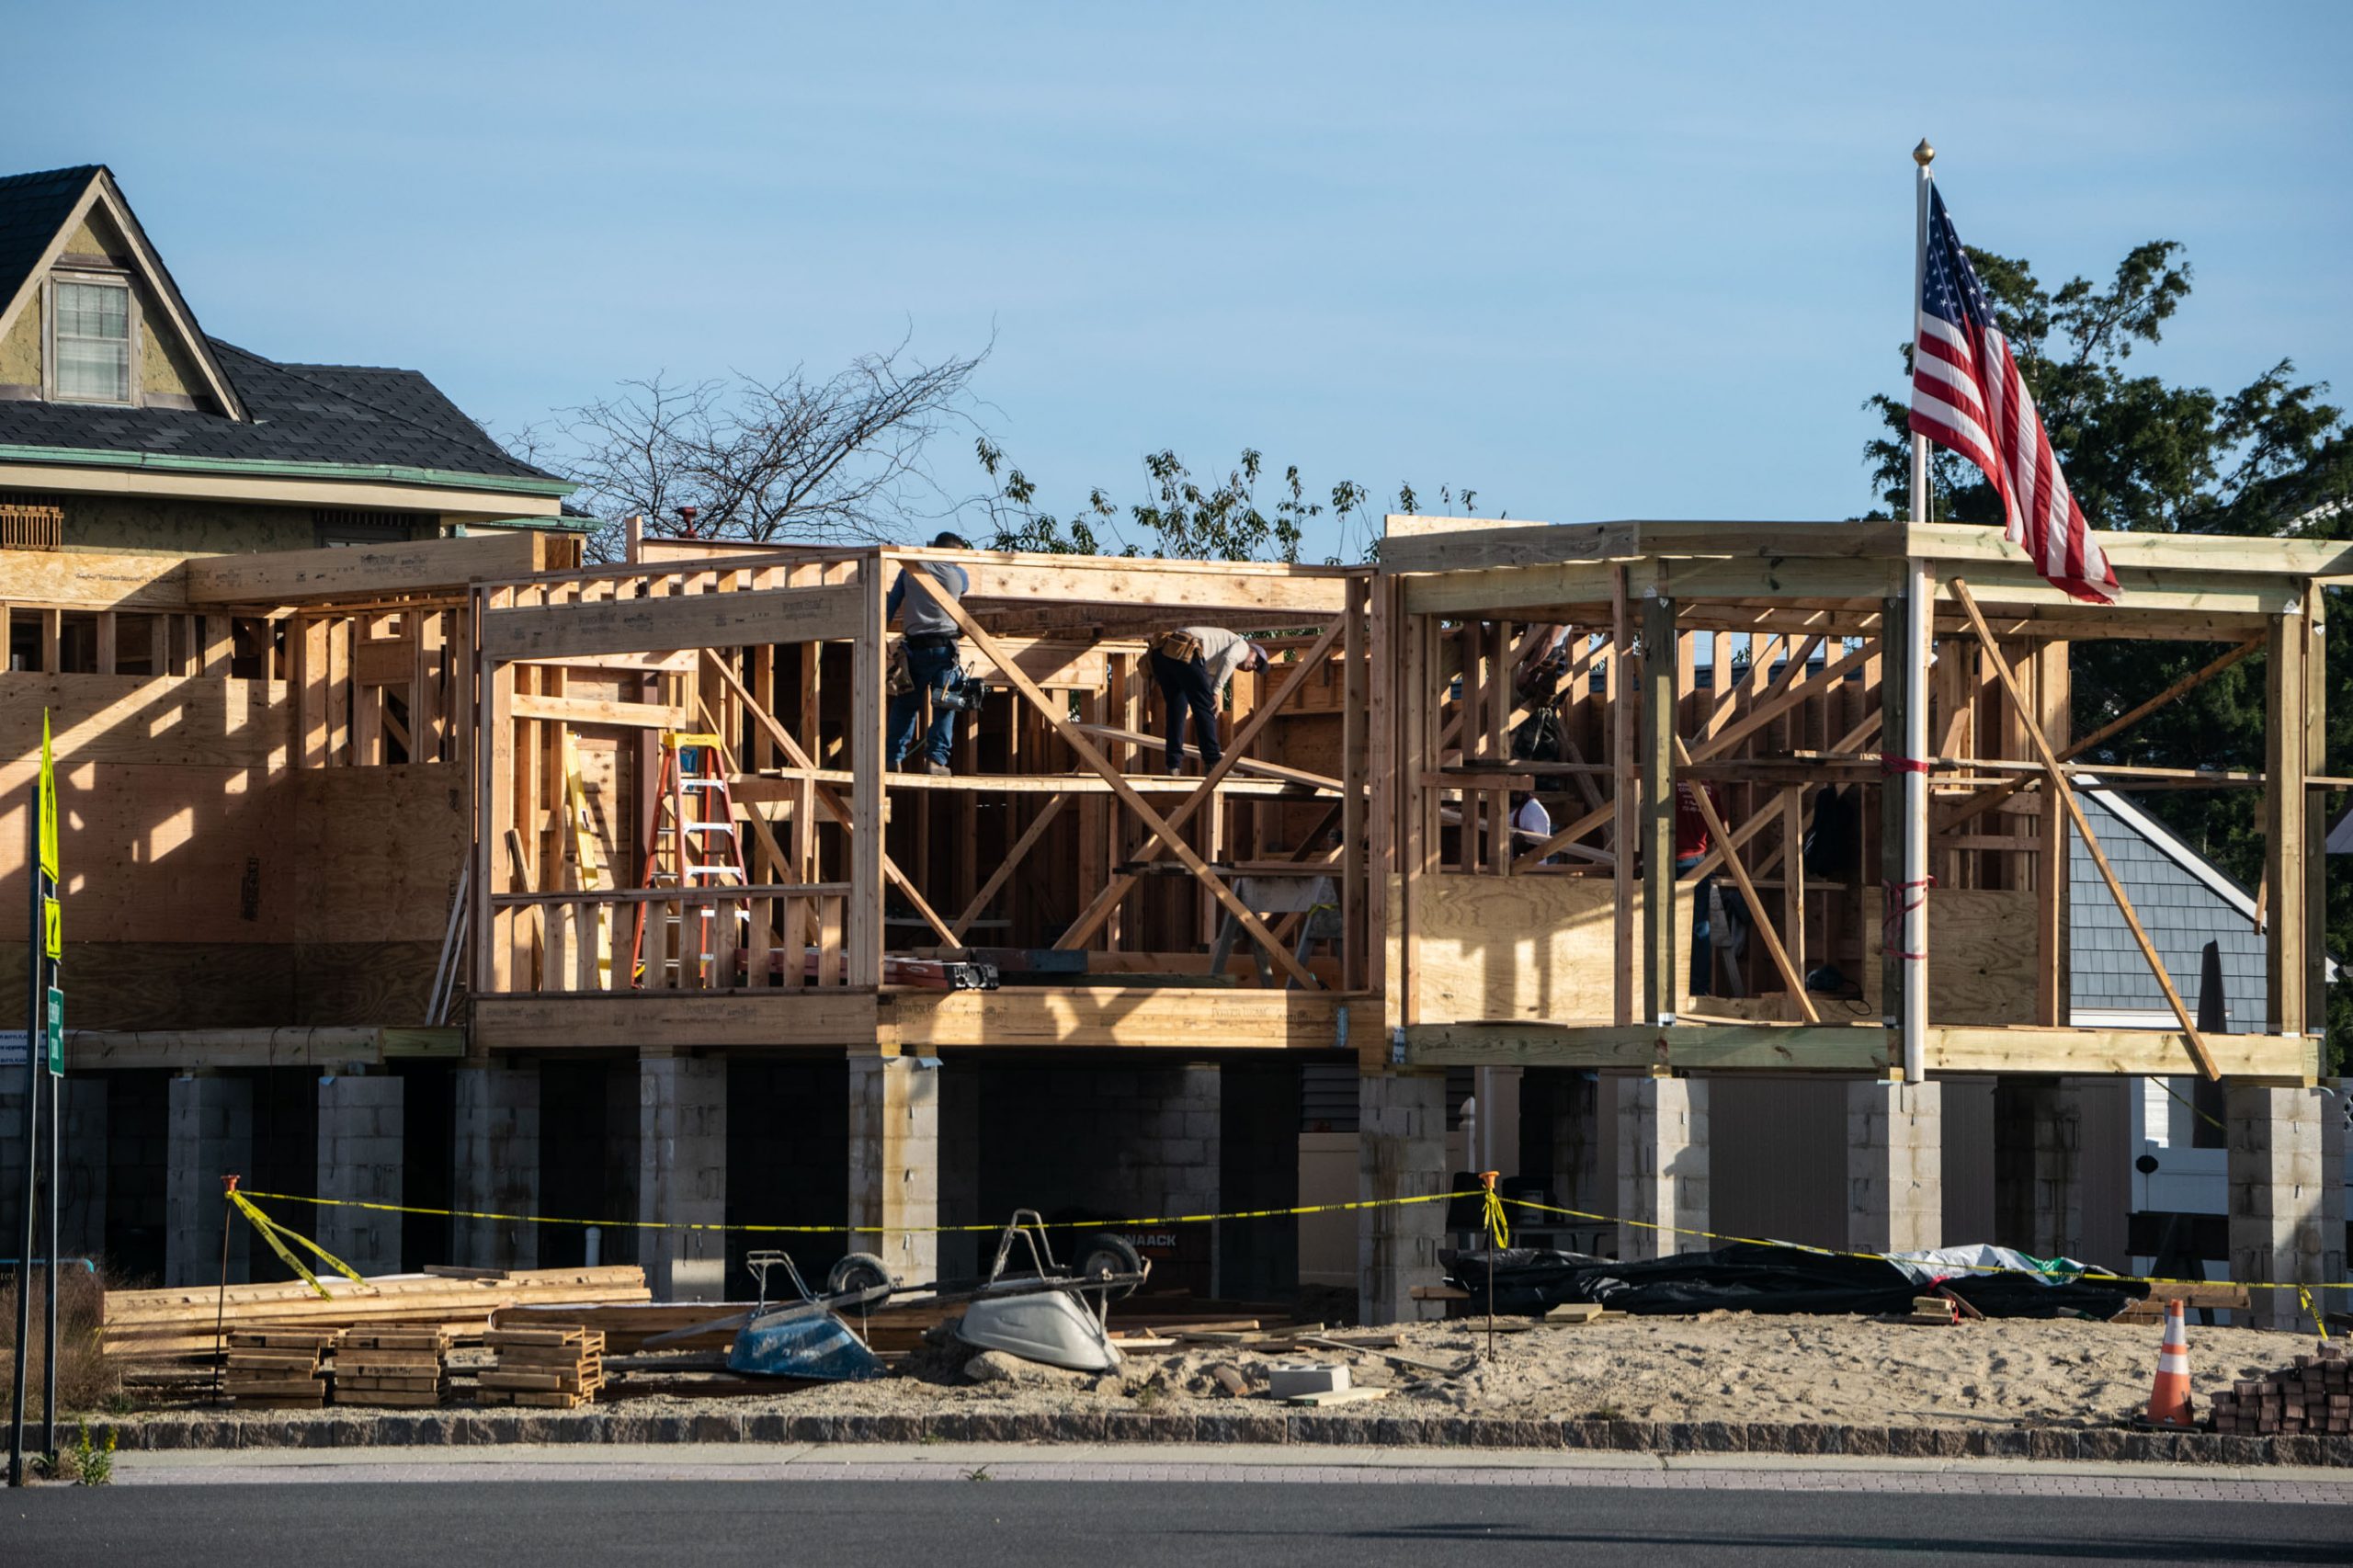 A new home being constructed in Ortley Beach, Oct. 2020. (Photo: Daniel Nee)